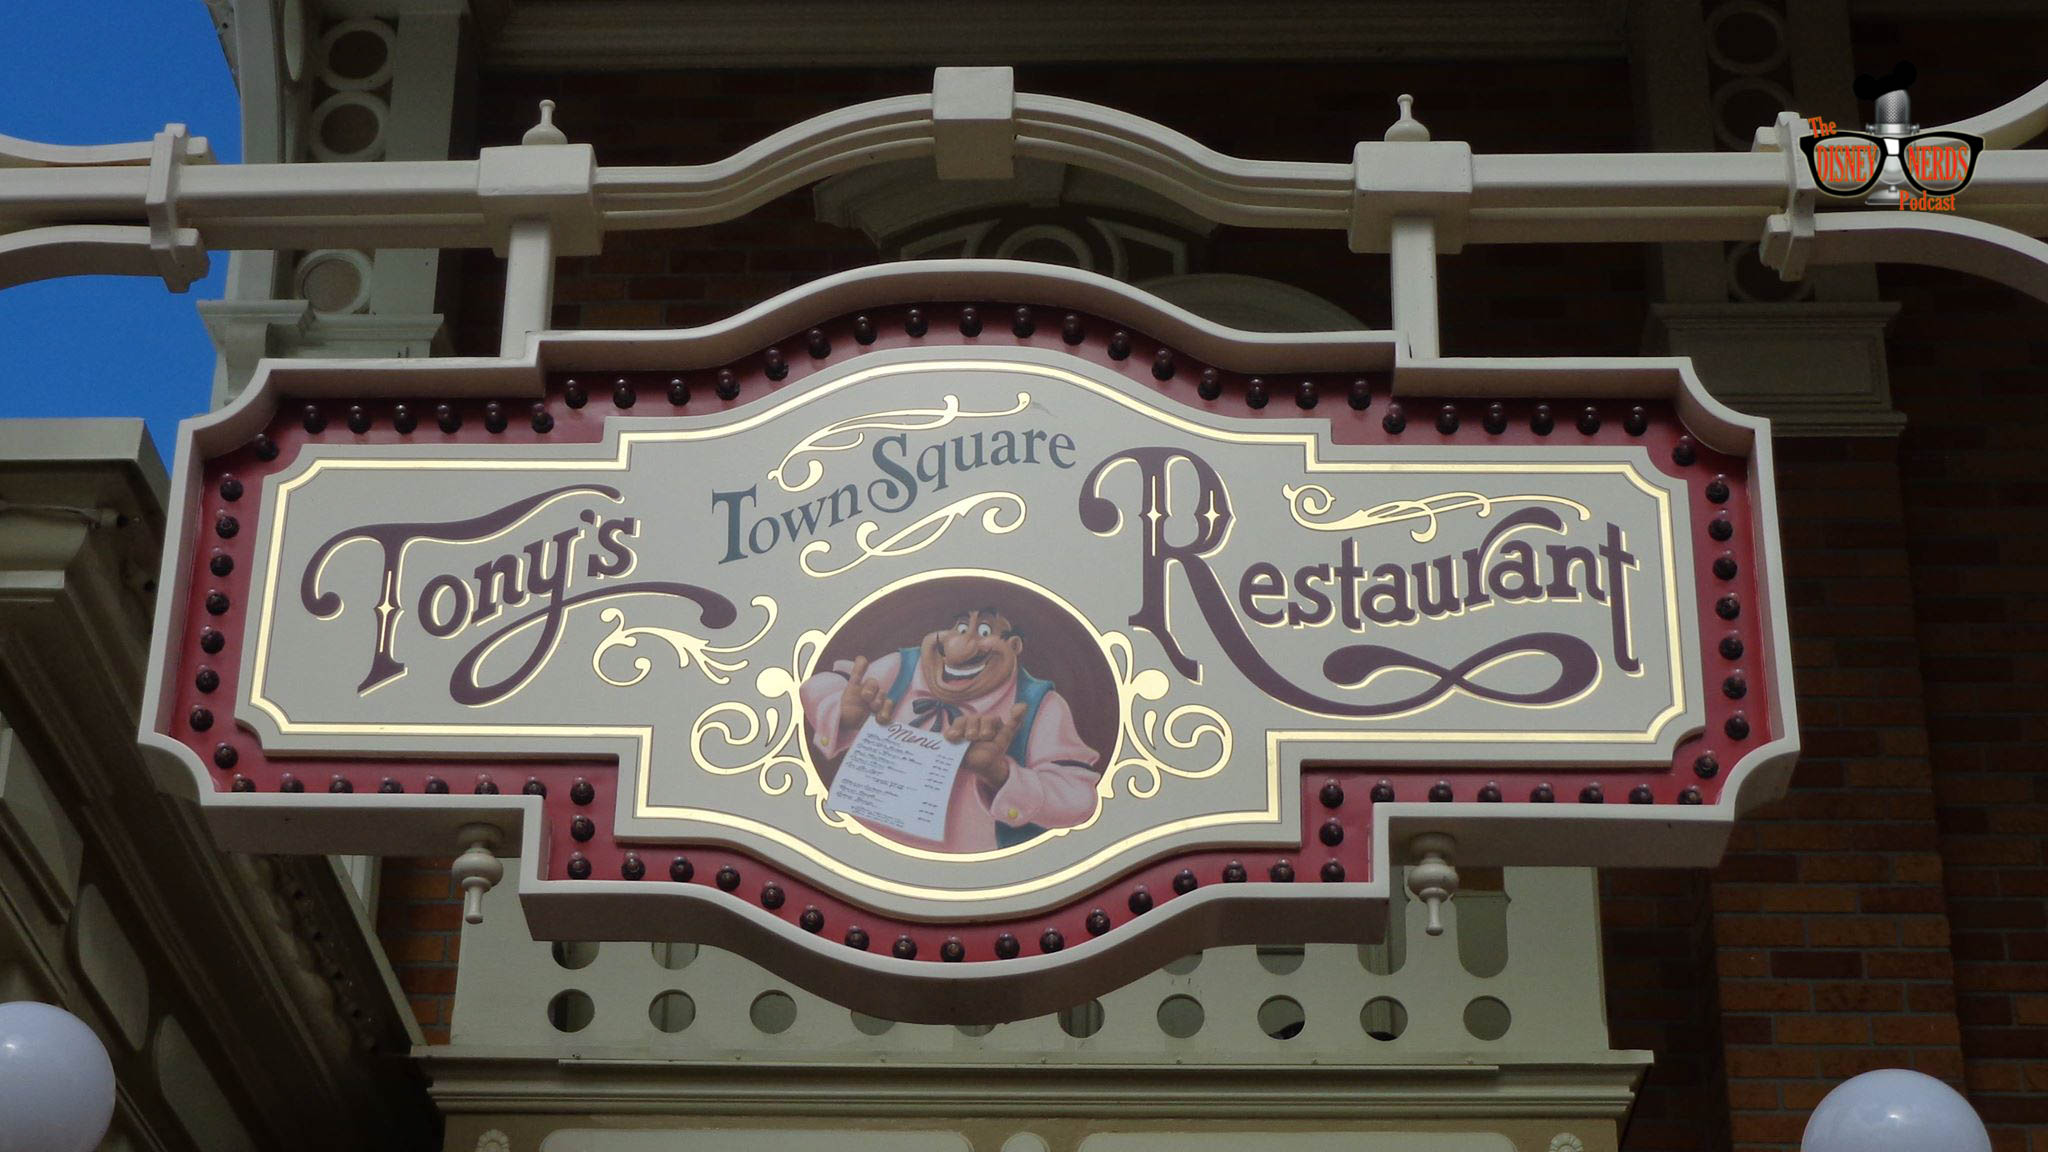 Tony’s Town Square A Disney Nerd’s Perspective The Disney Nerds Podcast